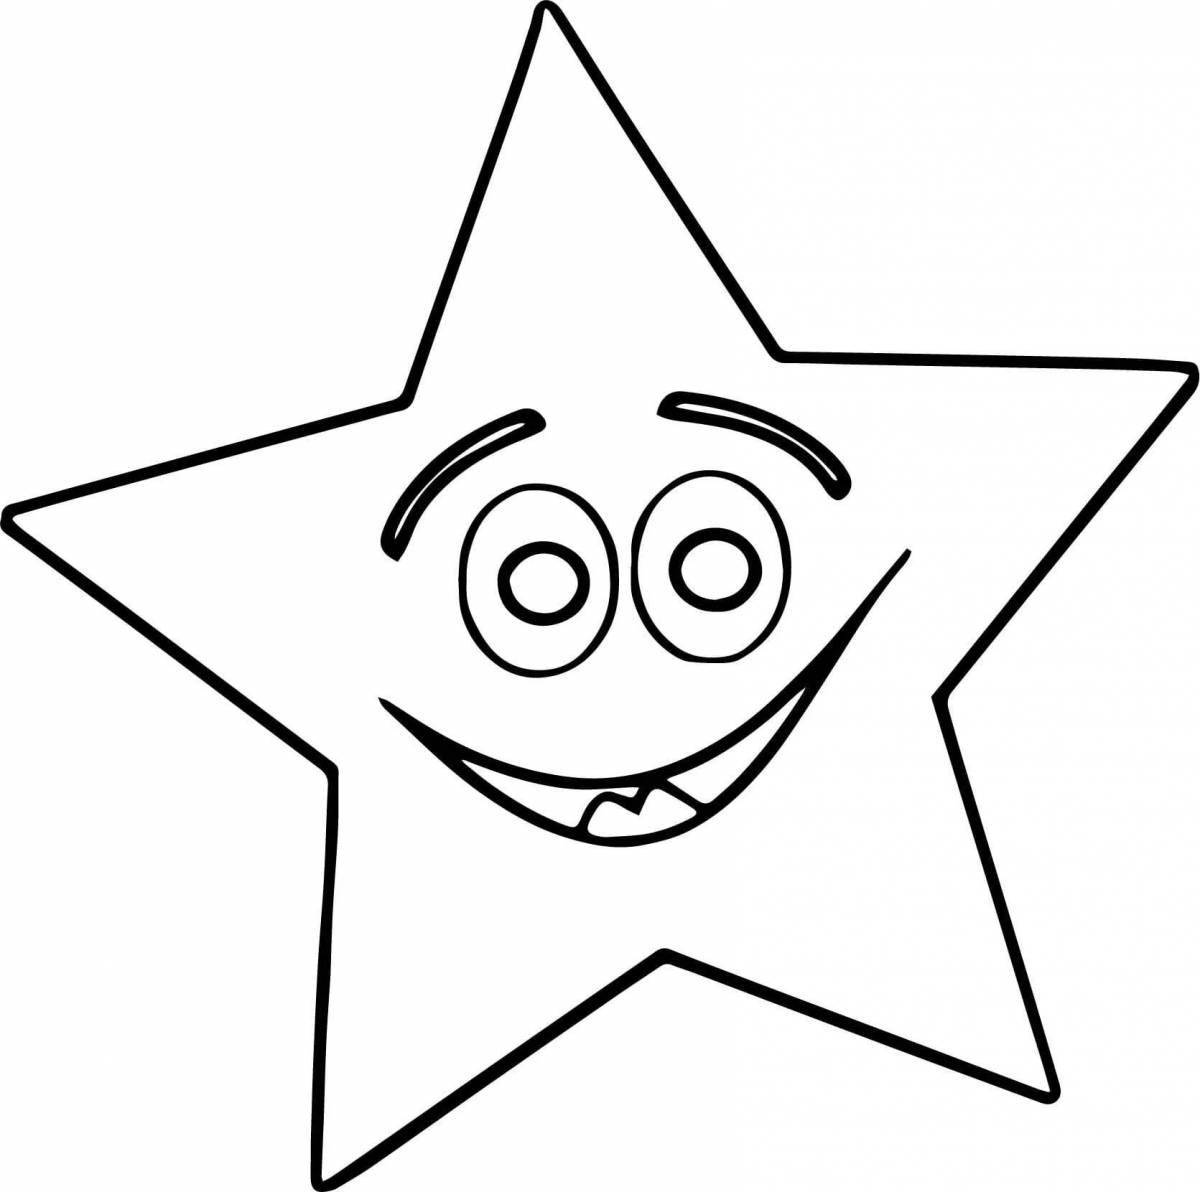 Coloring bright star for preschoolers